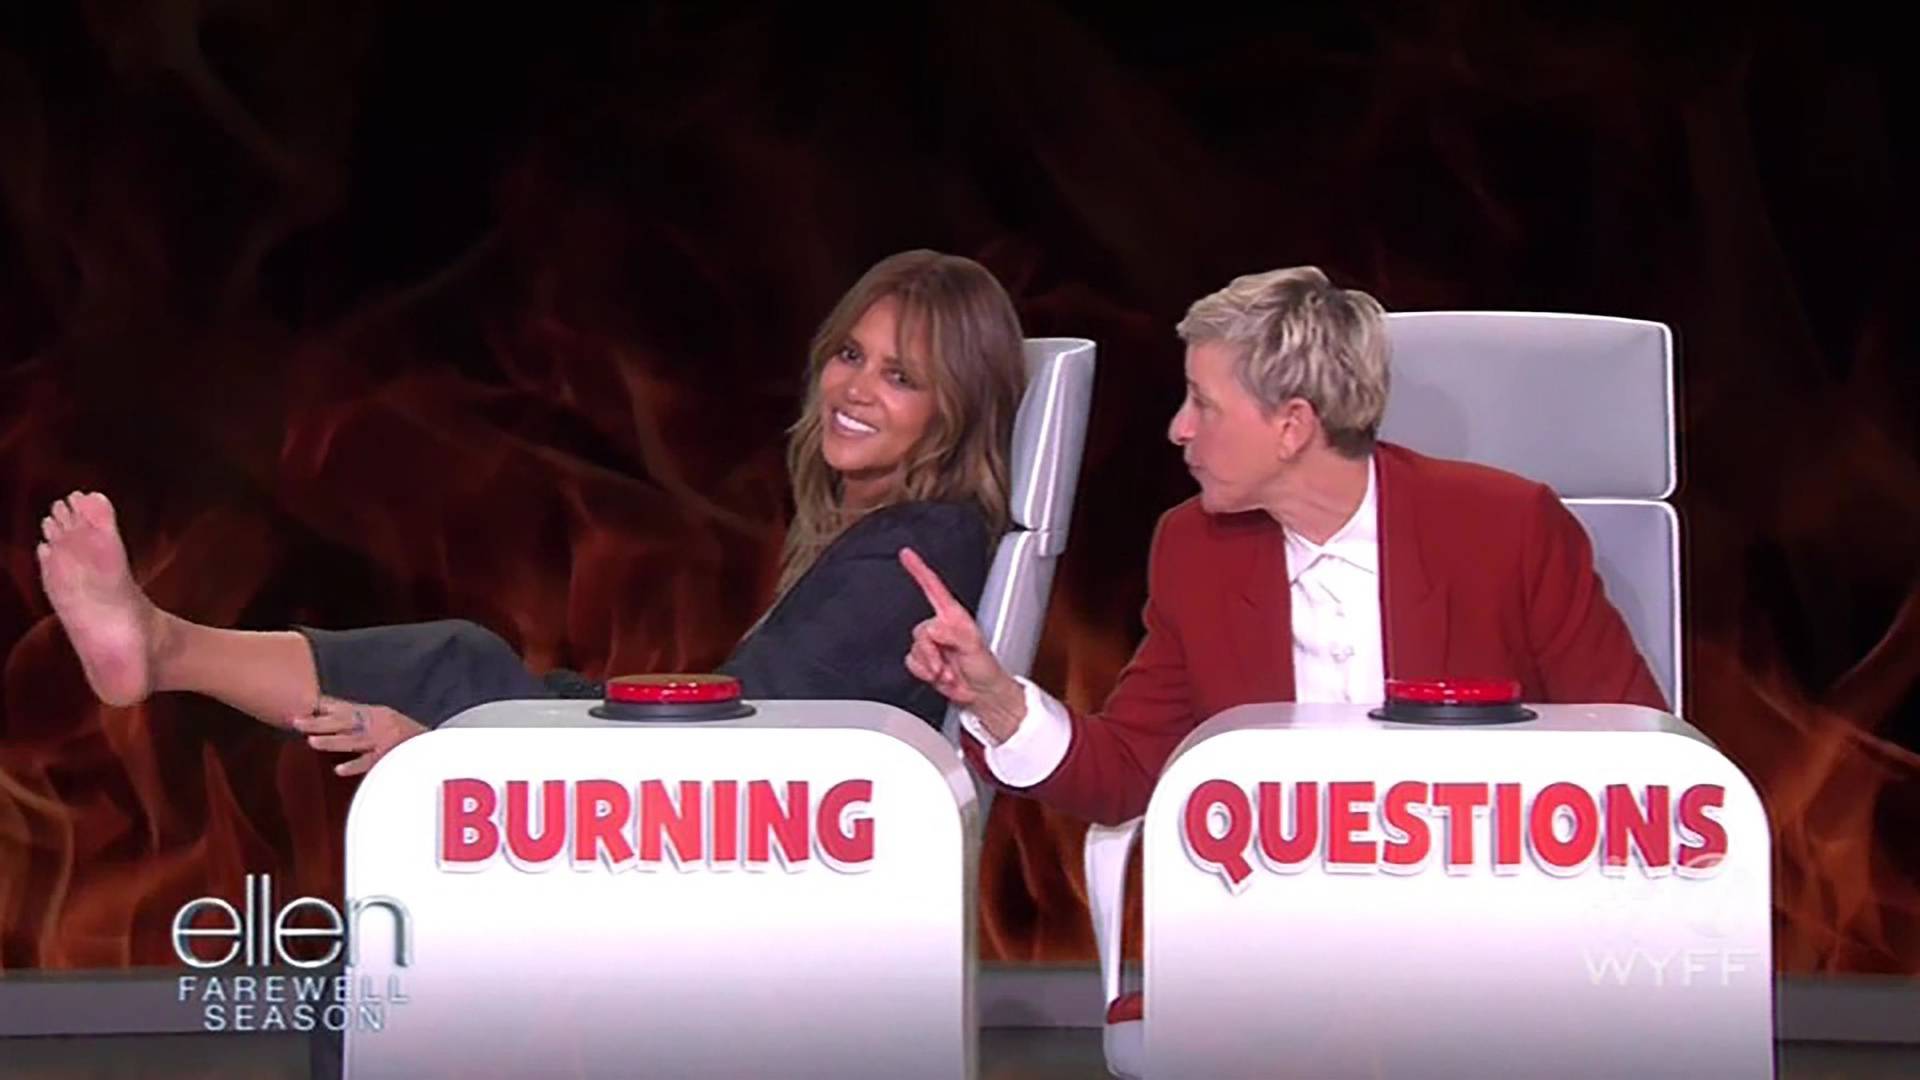 Halle Berry reveals her most memorable movie kiss was with X-Men co-star Hugh Jackman before addressing the rumour she has six toes, as she plays a game of Burning Questions on The Ellen Show